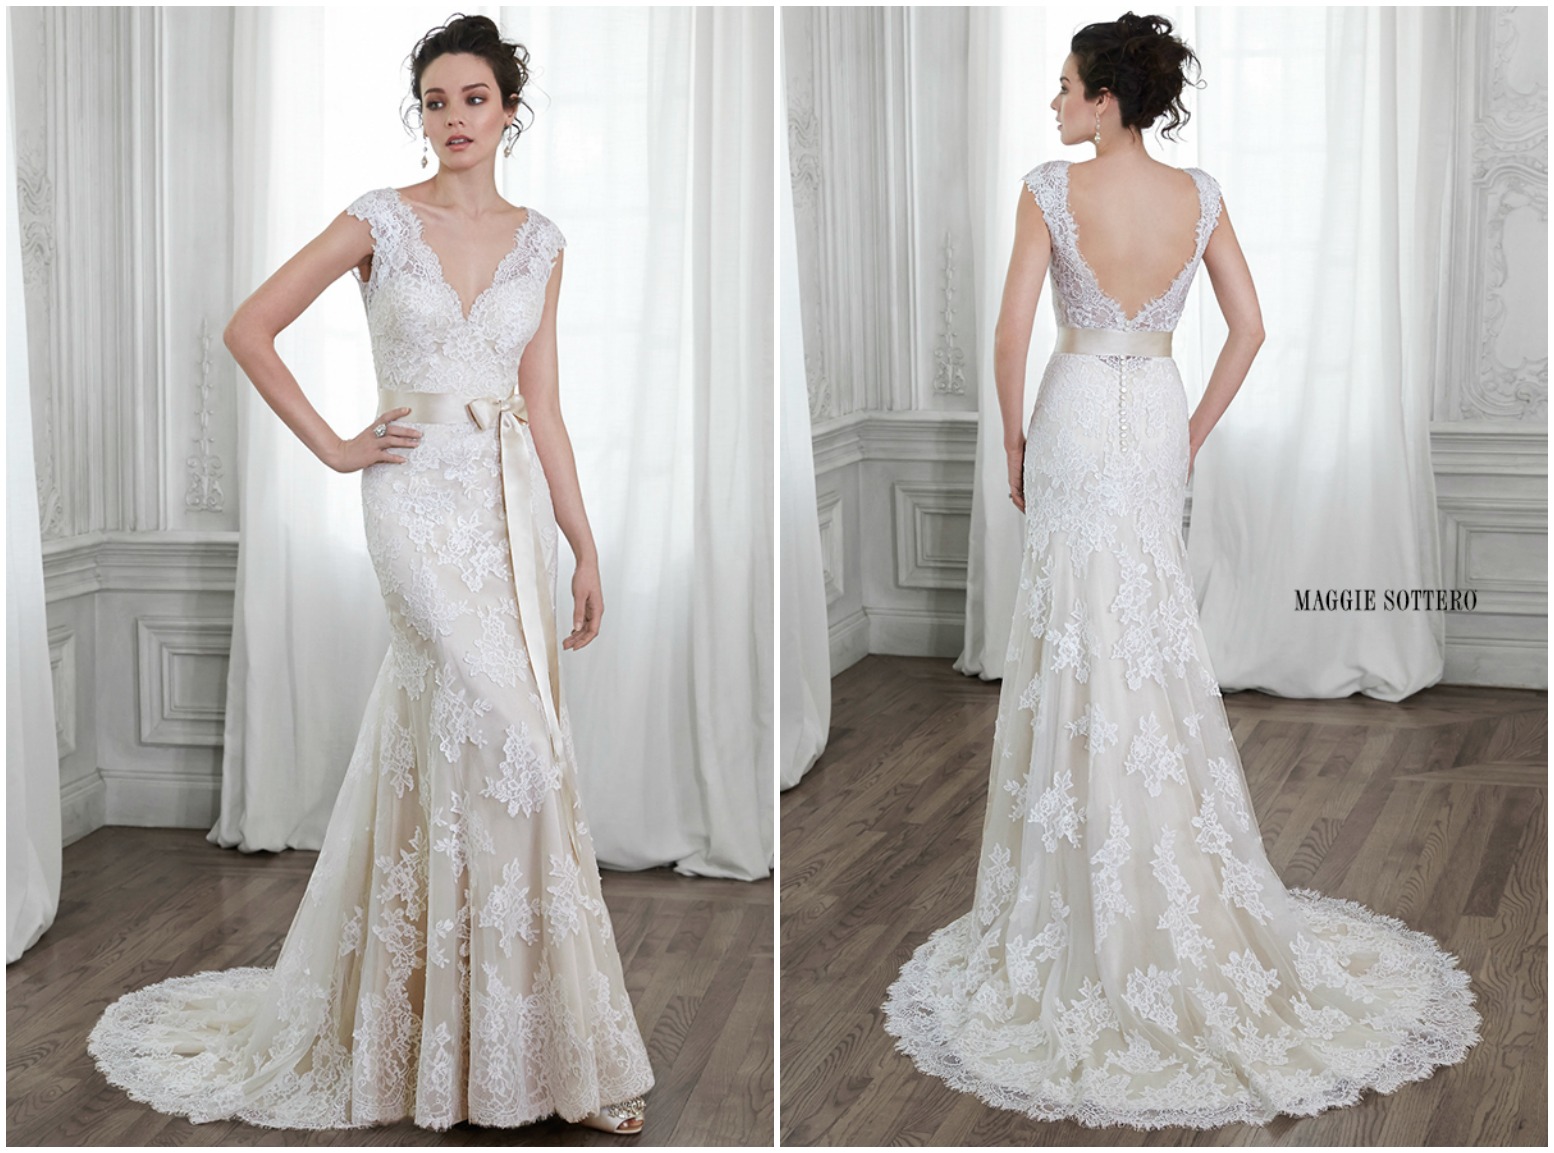 <a href="http://www.maggiesottero.com/dress.aspx?style=5MS015&amp;page=0&amp;pageSize=36&amp;keywordText=&amp;keywordType=All" target="_blank">Maggie Sottero</a>